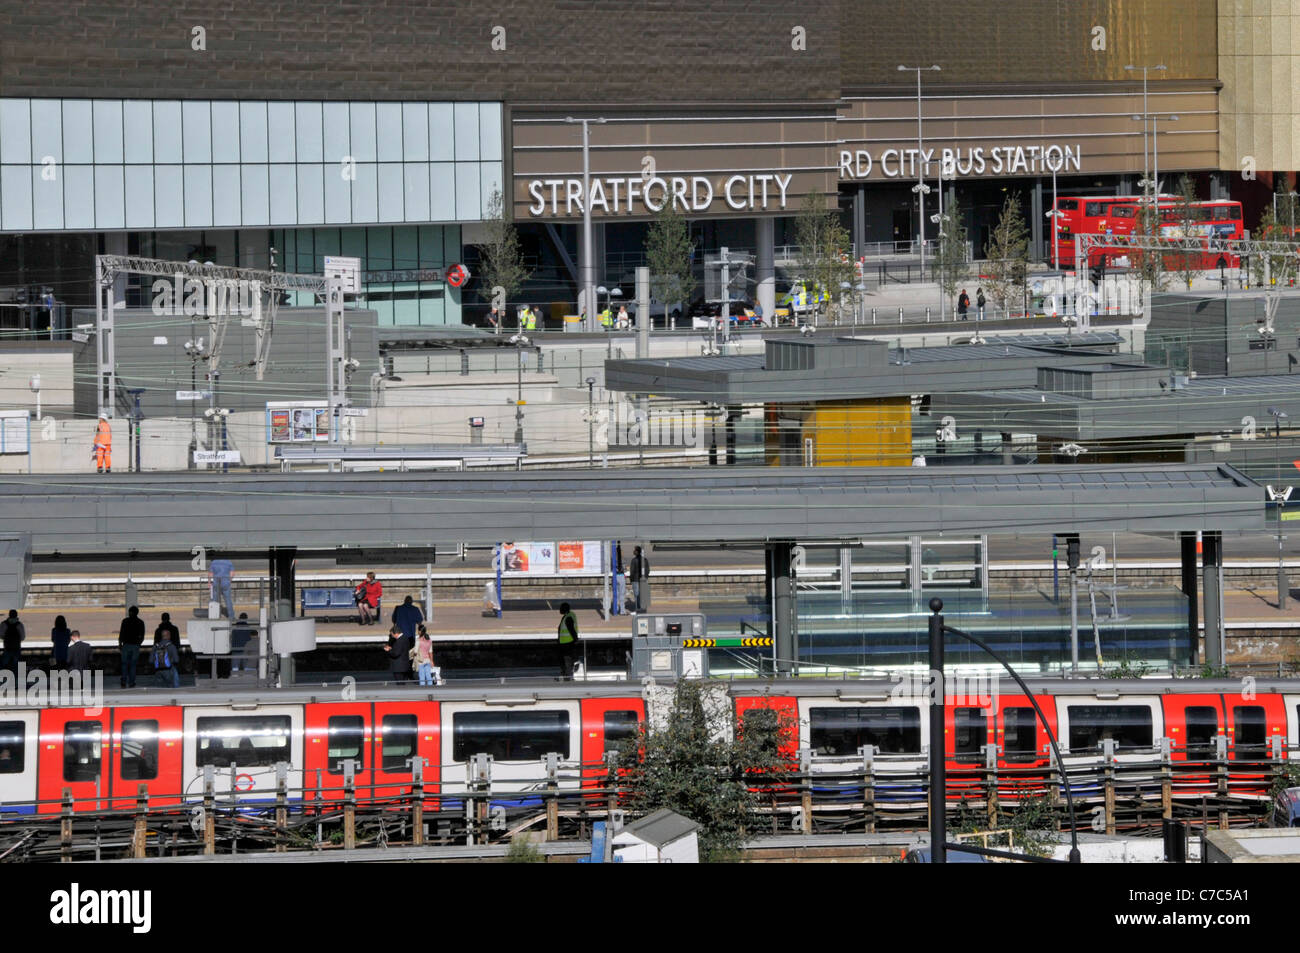 Stratford London railway station platform & trains includes Central line train & Stratford City Bus Station stop at Westfield shopping centre England Stock Photo